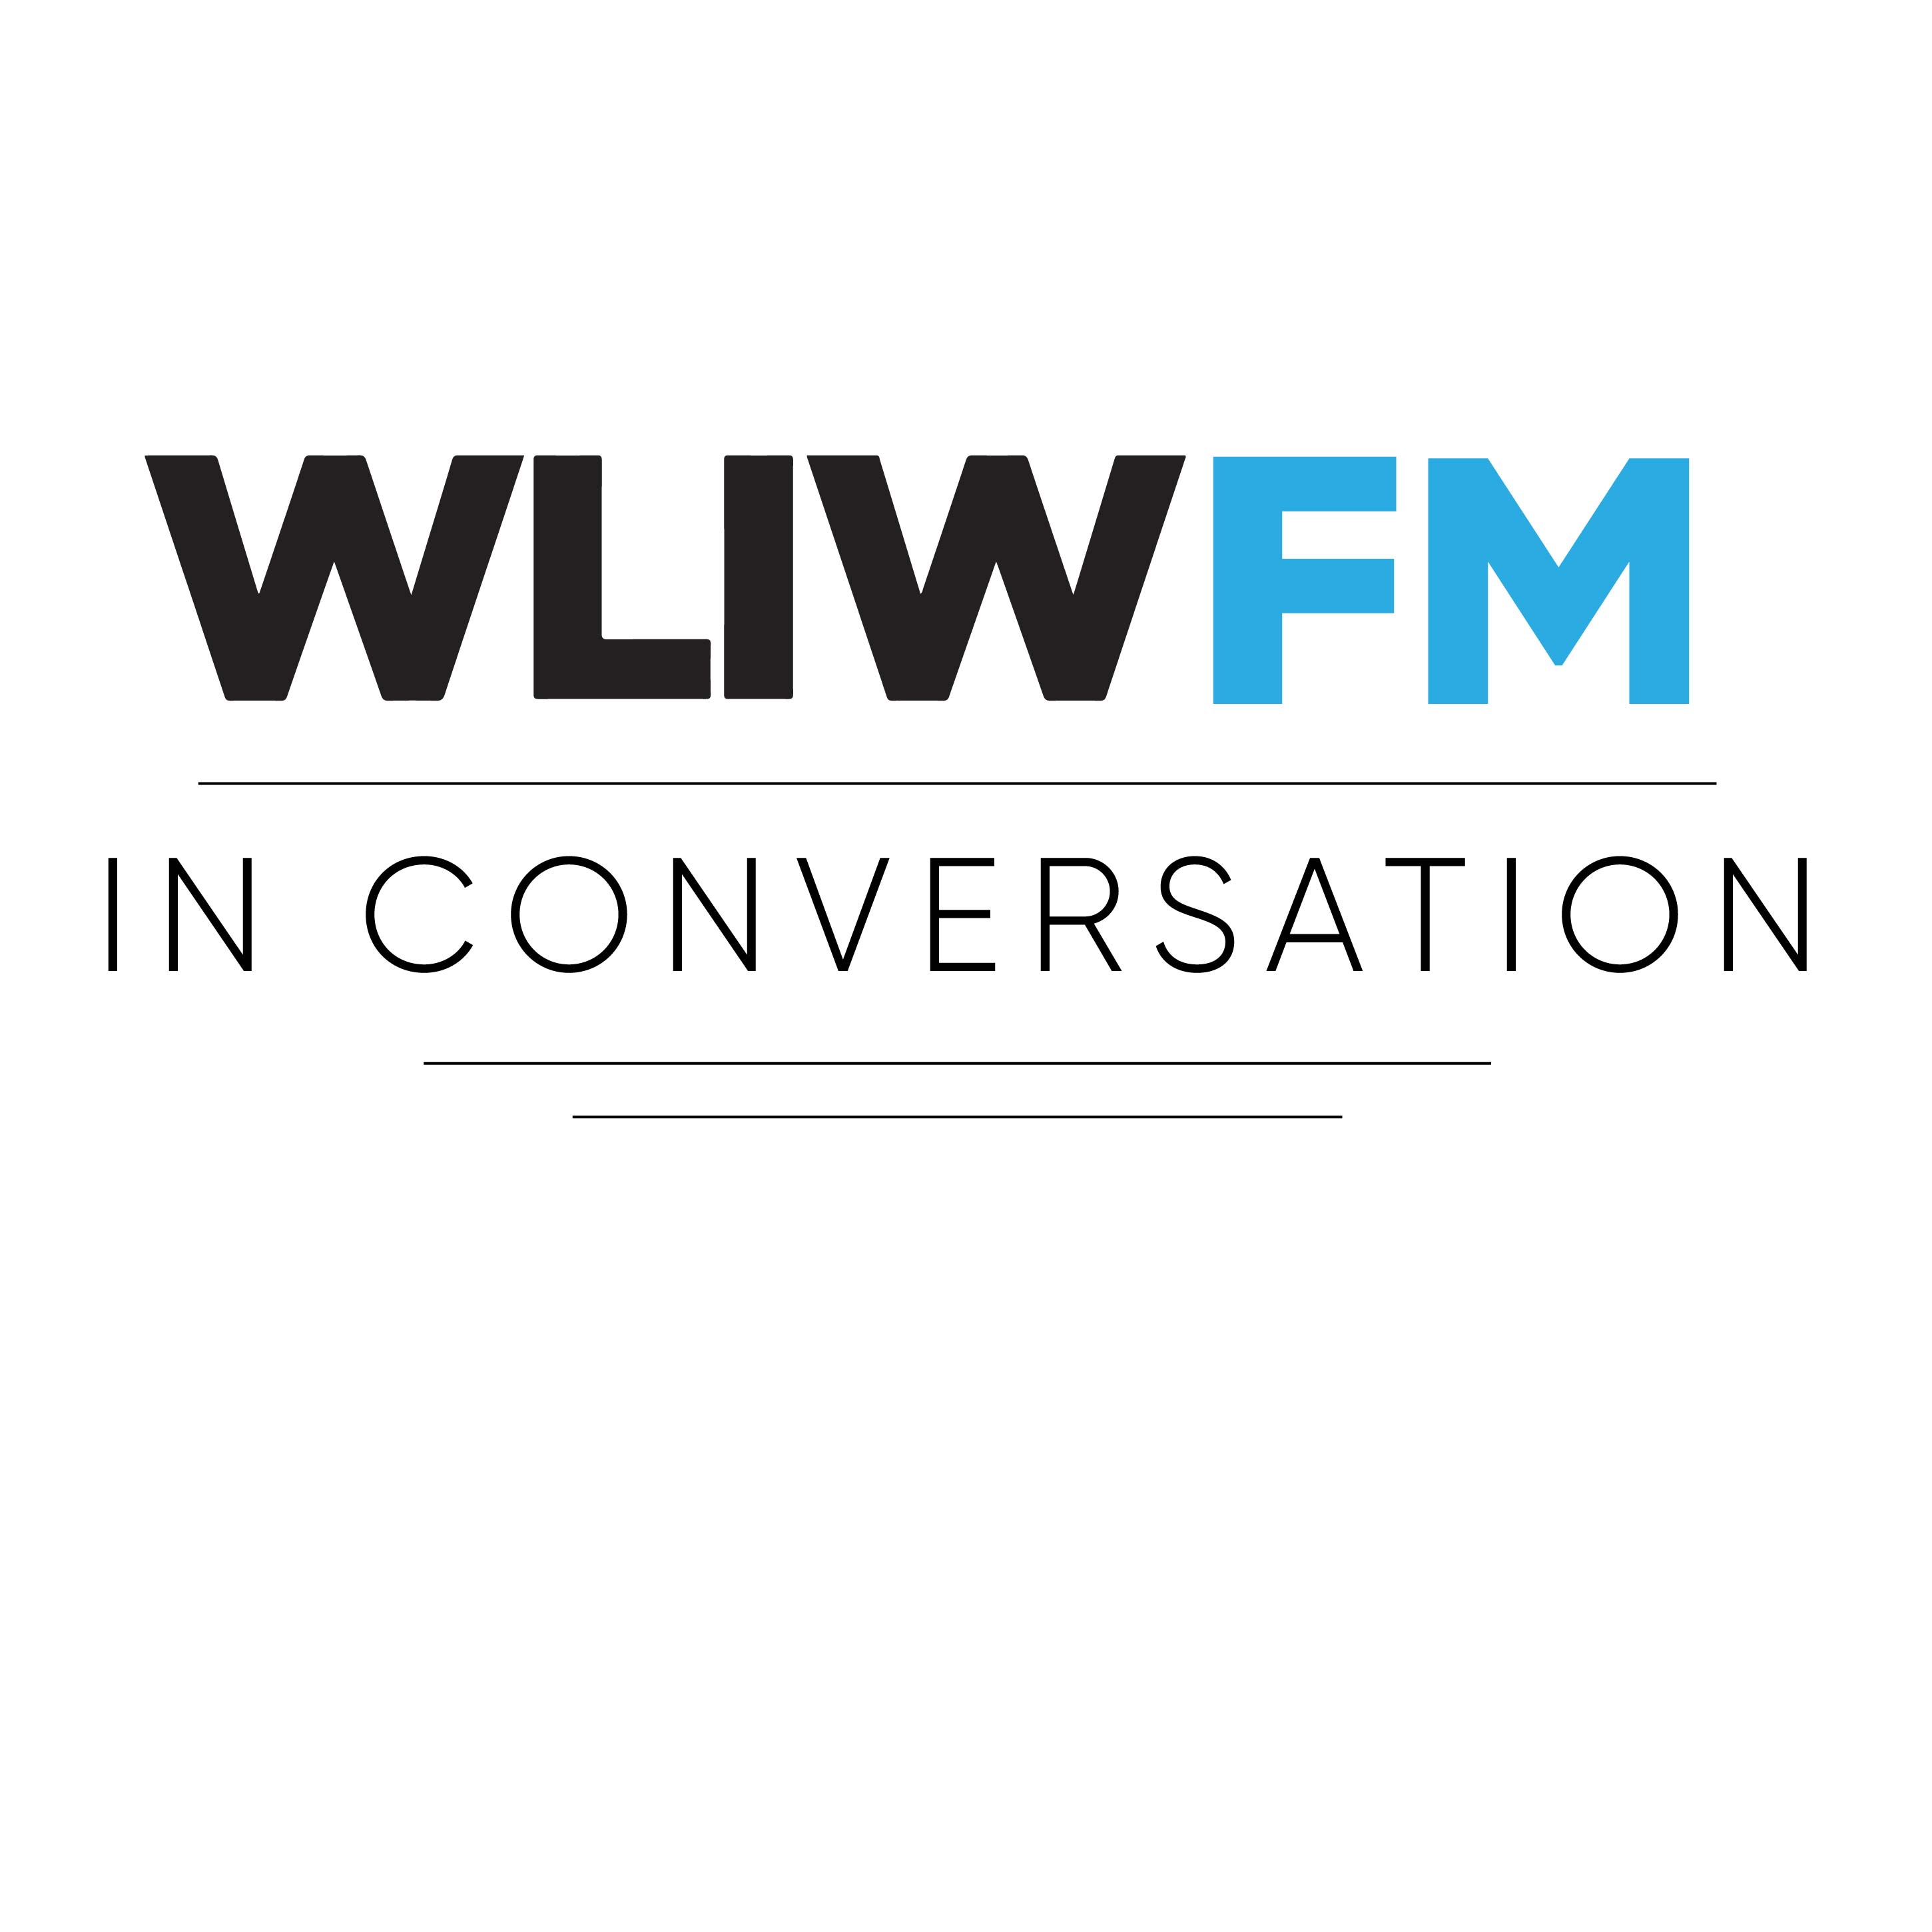 Artwork for WLIW-FM In Conversation